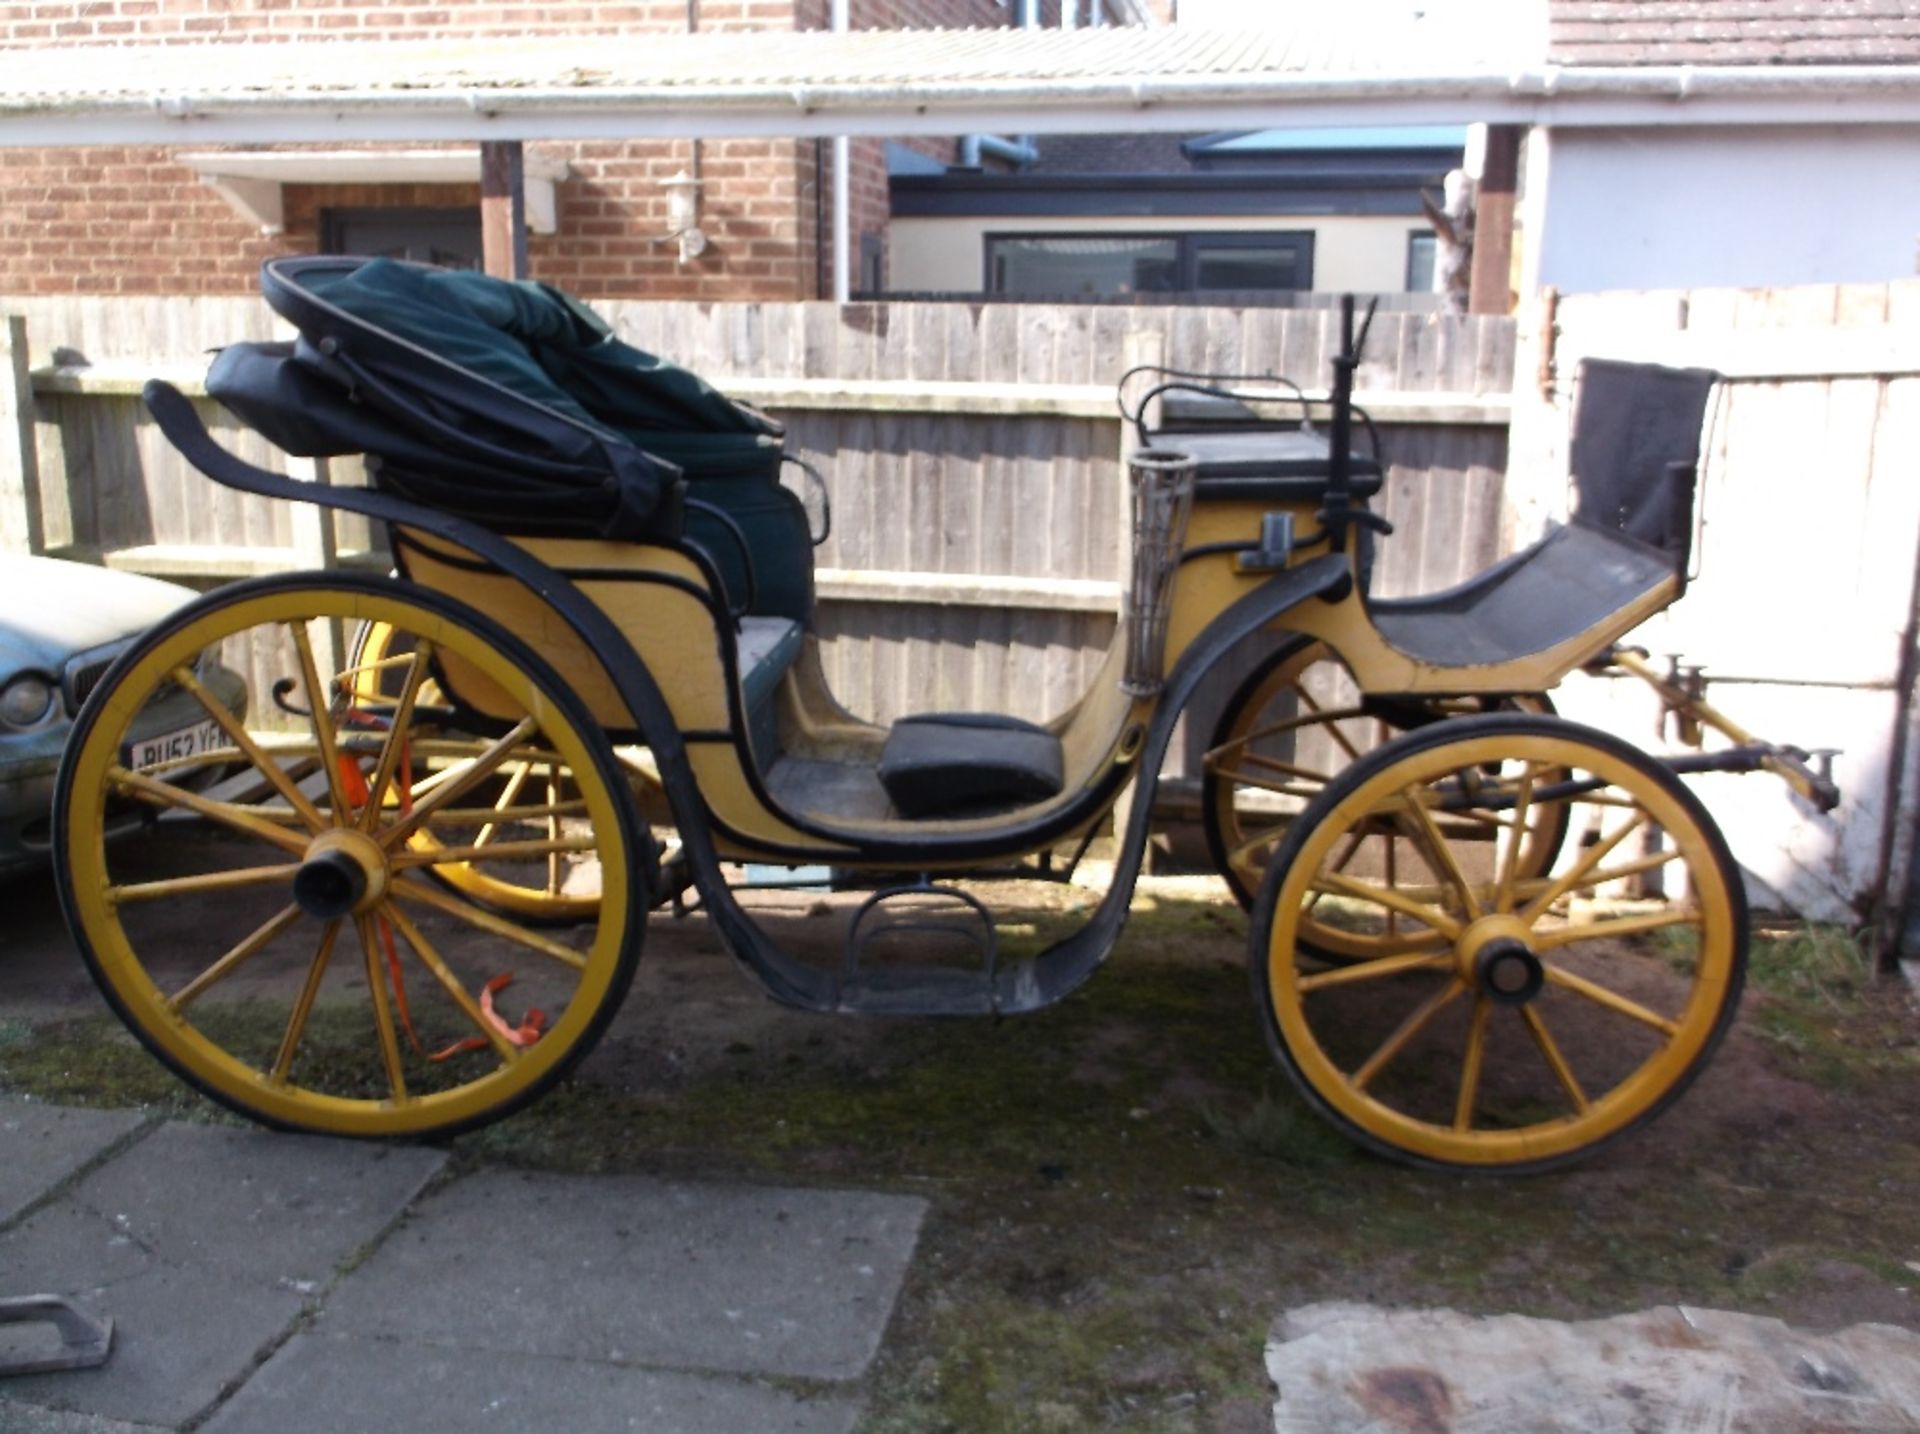 VICTORIA circa 1900 to suit 15 to 17hh. Painted yellow and black with green lining.